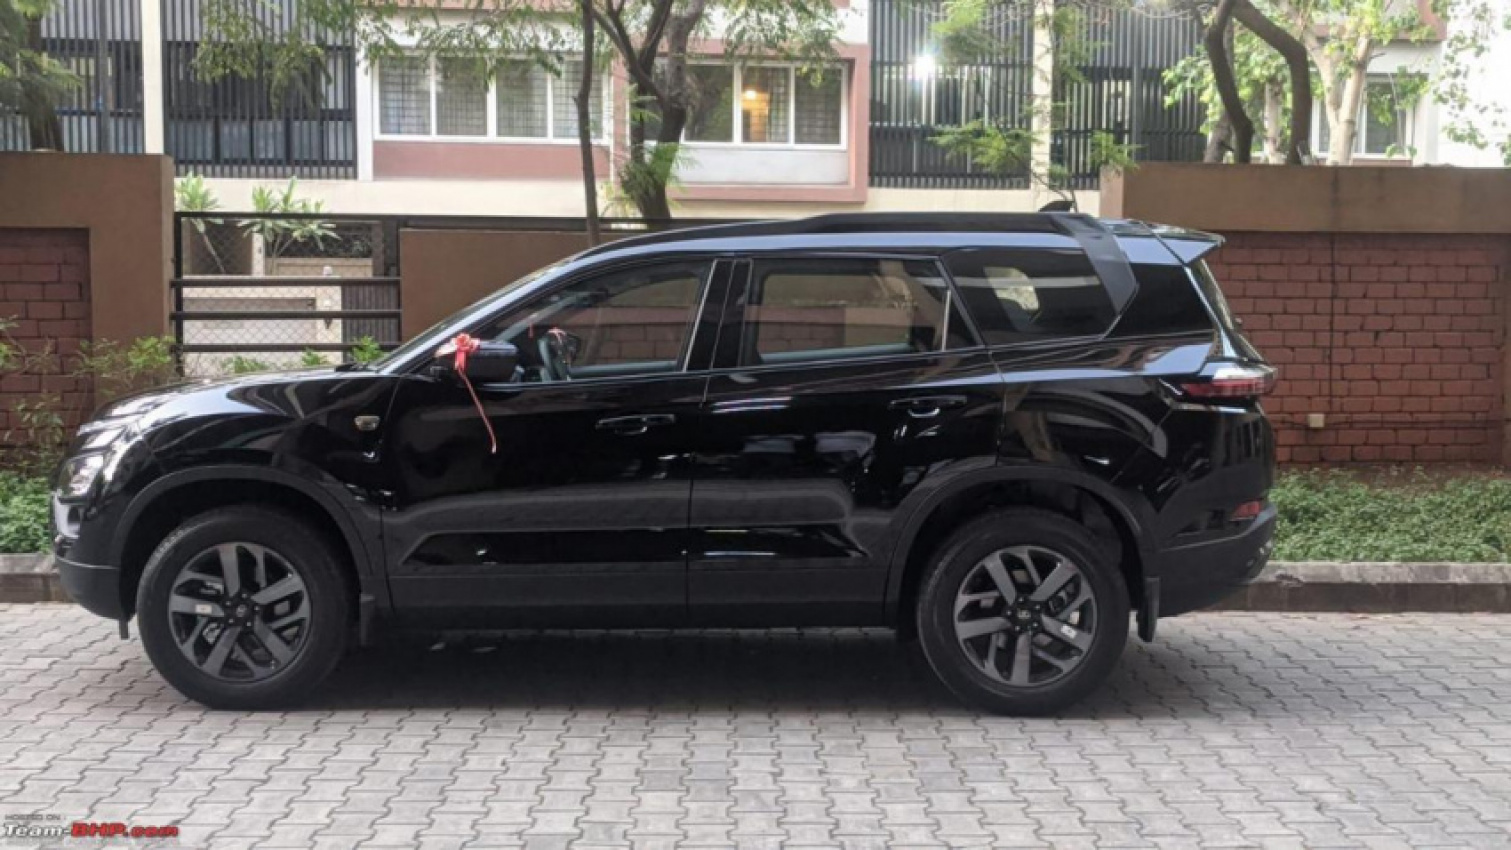 autos, cars, car ownership, car purchase, indian, member content, safari, tata, how i ended up buying the tata safari: first impressions after delivery